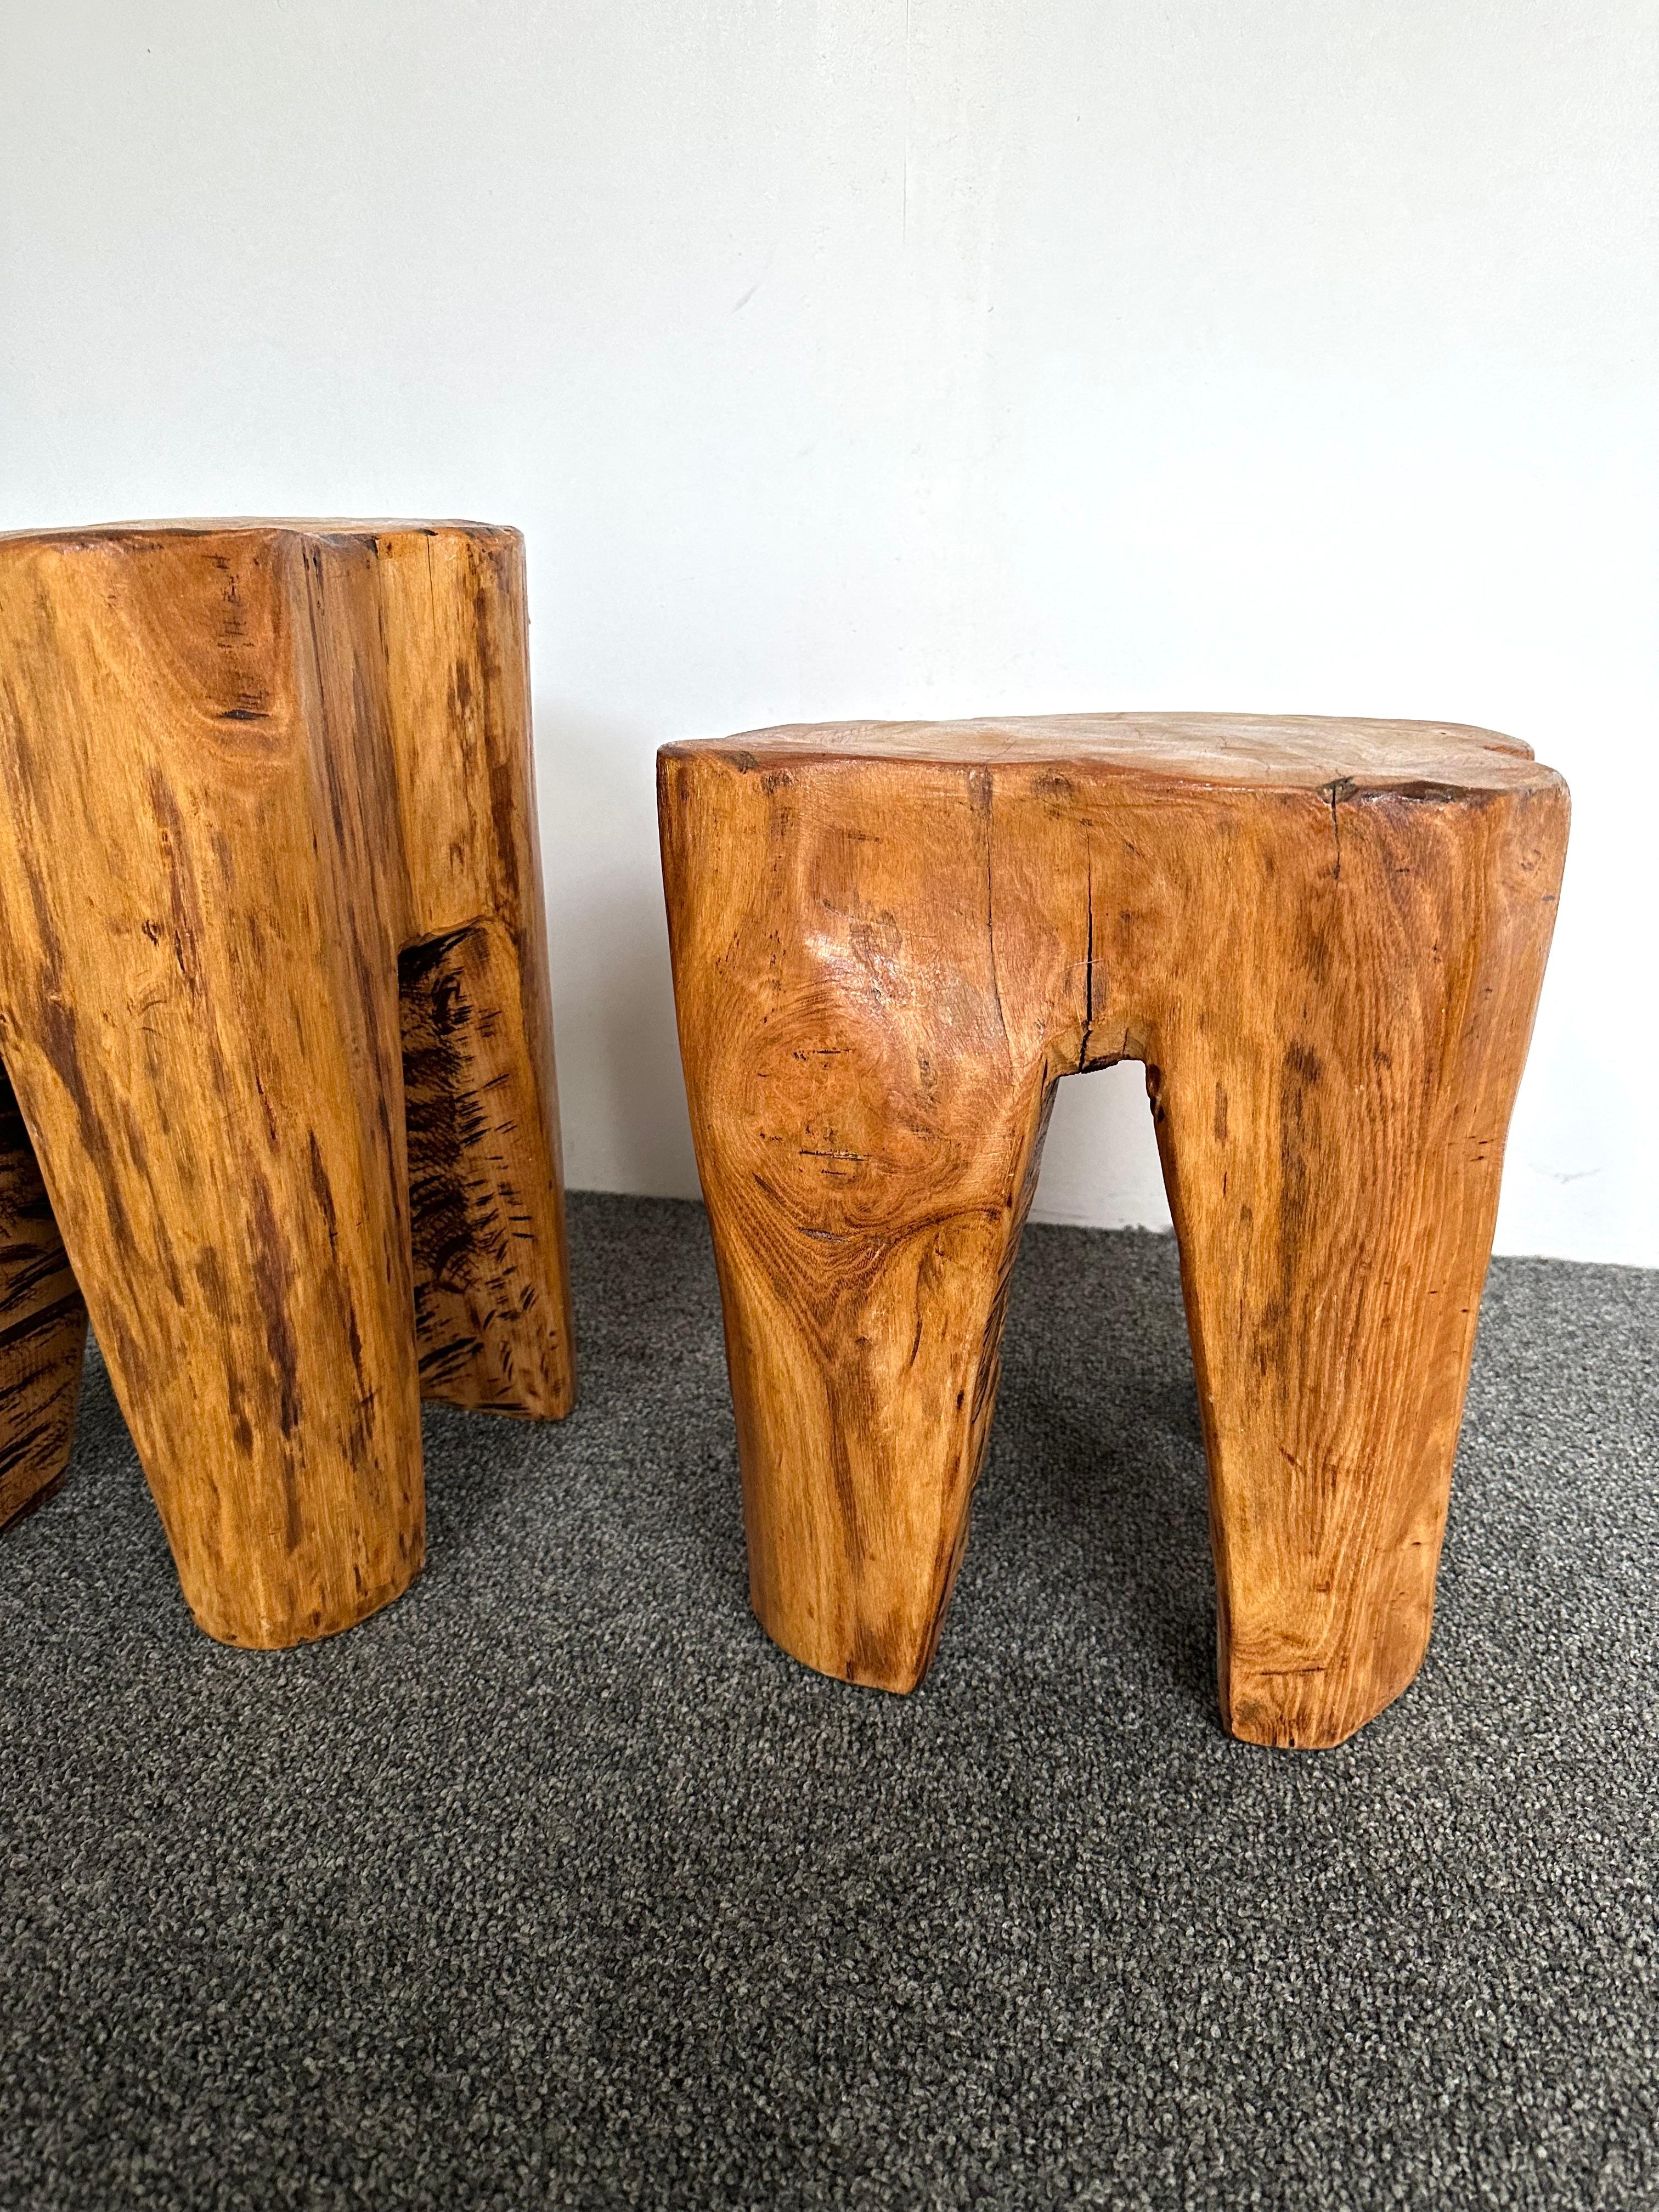 Mid-Century Modern Brutalist pair of or set of 2 side end low coffee cocktail tables or gueridon or small stools in massive walnut wood. Design in the mood of Alexandre Noll, Pierre Chapo, Charlotte Perriand, Le Corbusier Pierre Jeanneret, Jean